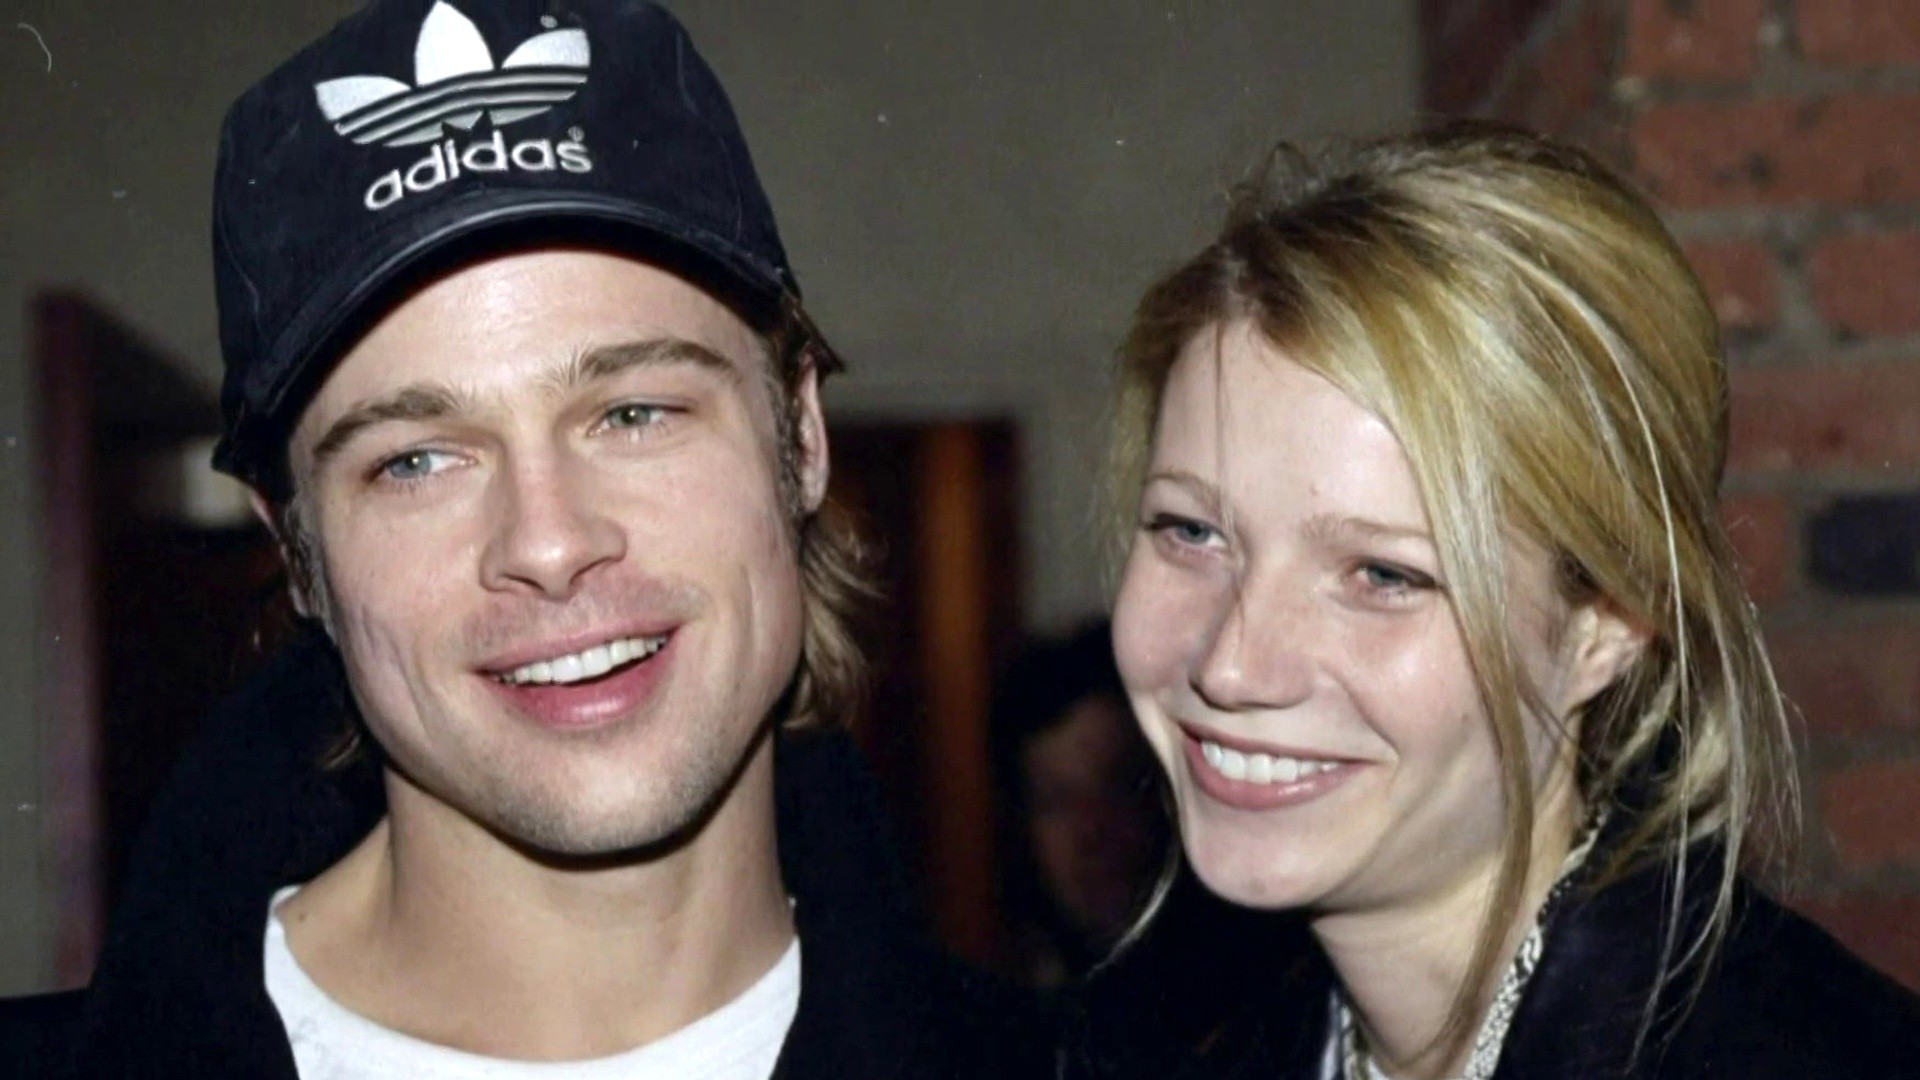 Gwyneth Paltrow Shows Dress From 1996 Date With Brad Pitt